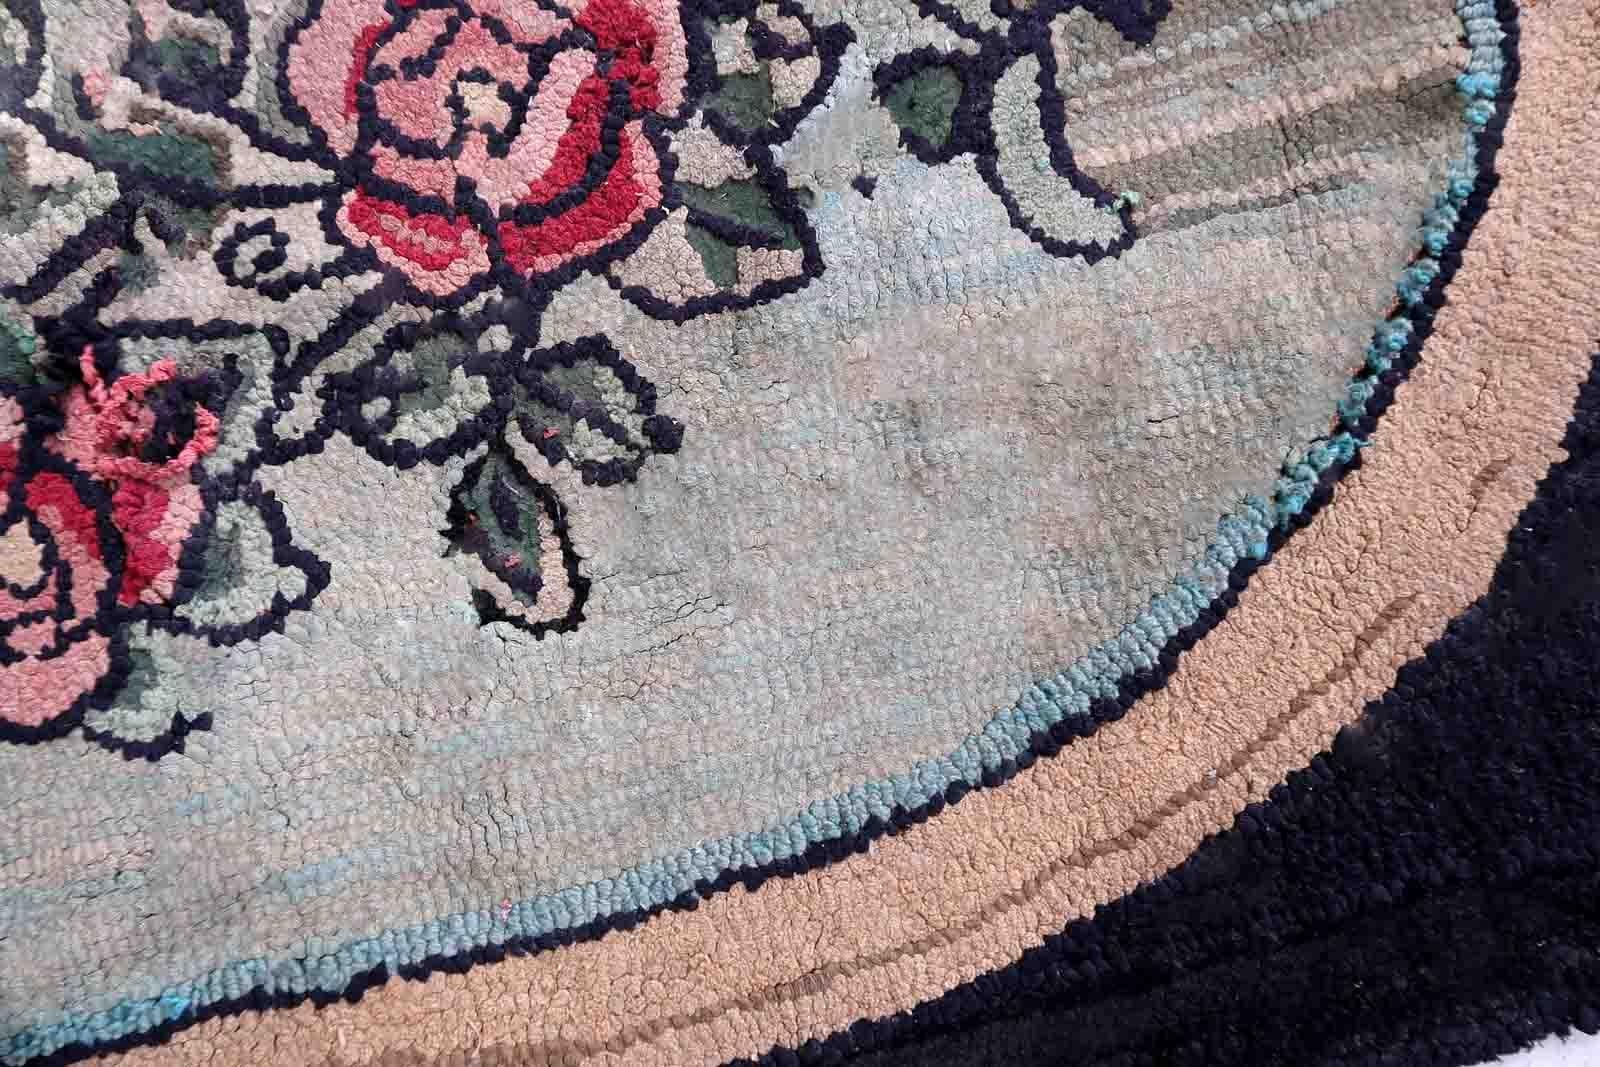 Handmade antique American Hooked rug in floral design. The rug is from the beginning of 20th century. It has some old restorations and discolorations.

-condition: restored, discolorations,

-circa: 1900s,

-size: 2.4' x 3.4' (74cm x